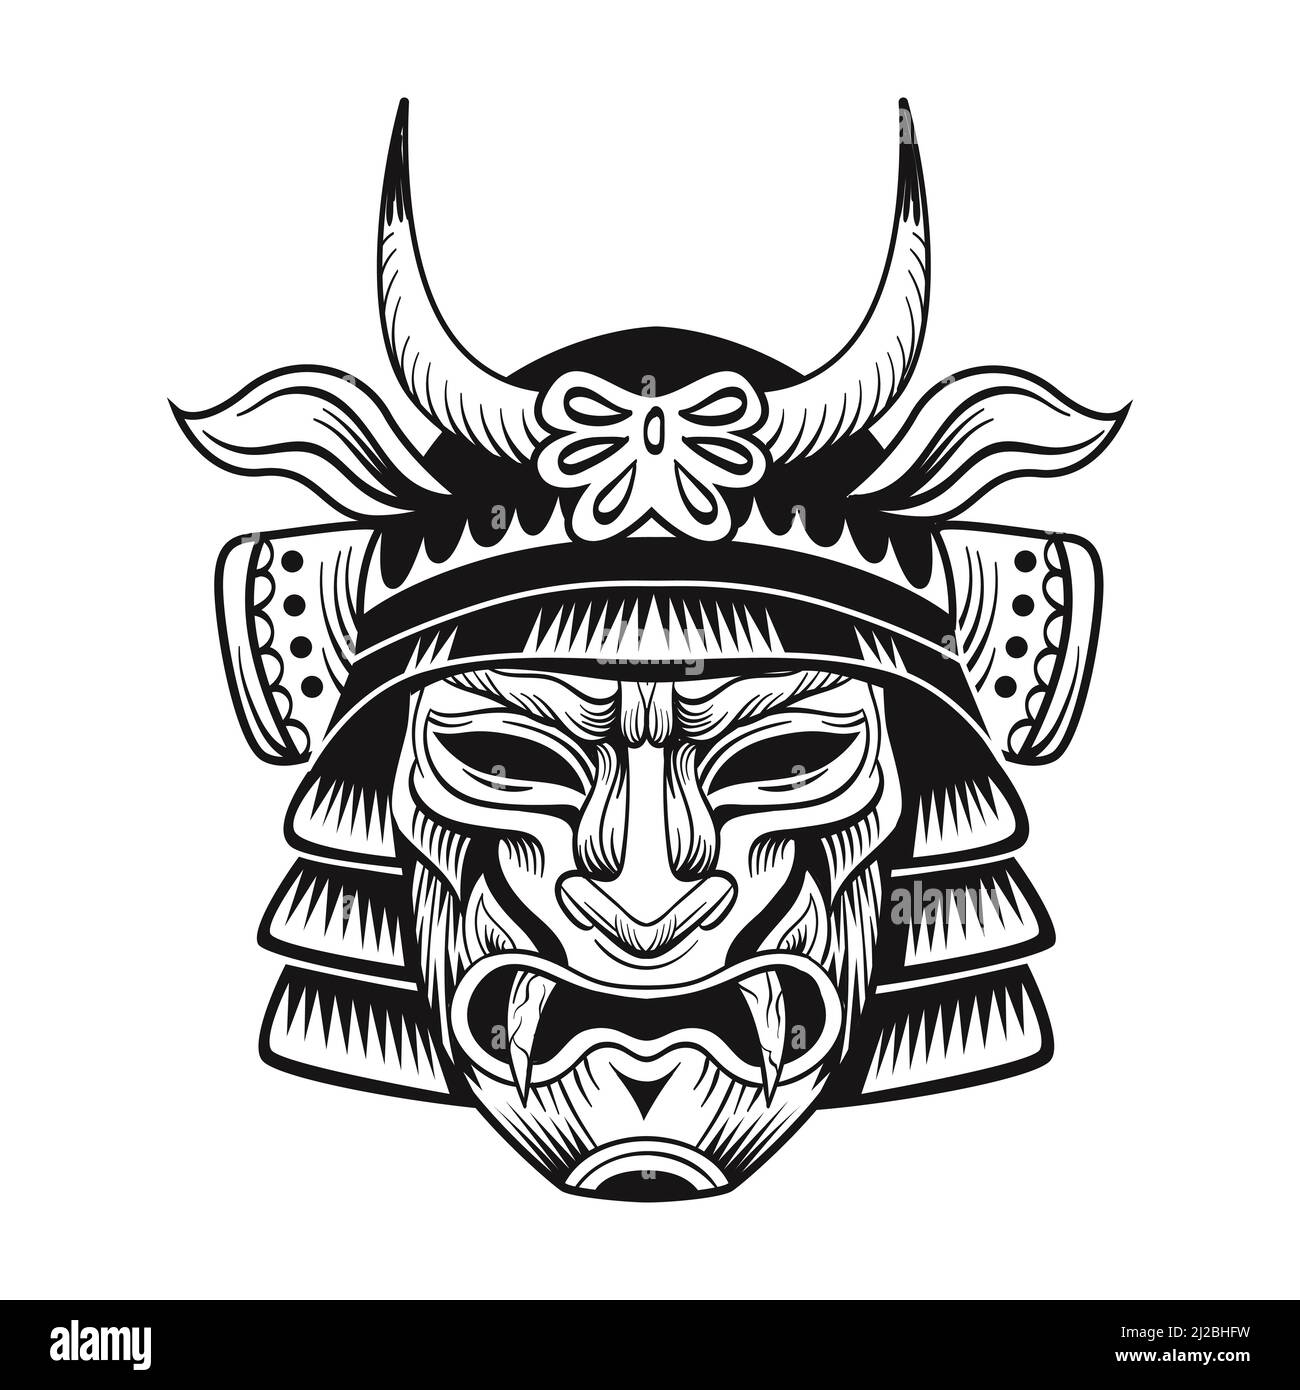 Japanese ninja black mask flat image. Japan traditional vintage fighter isolated vector illustration. Military art and design elements concept Stock Vector